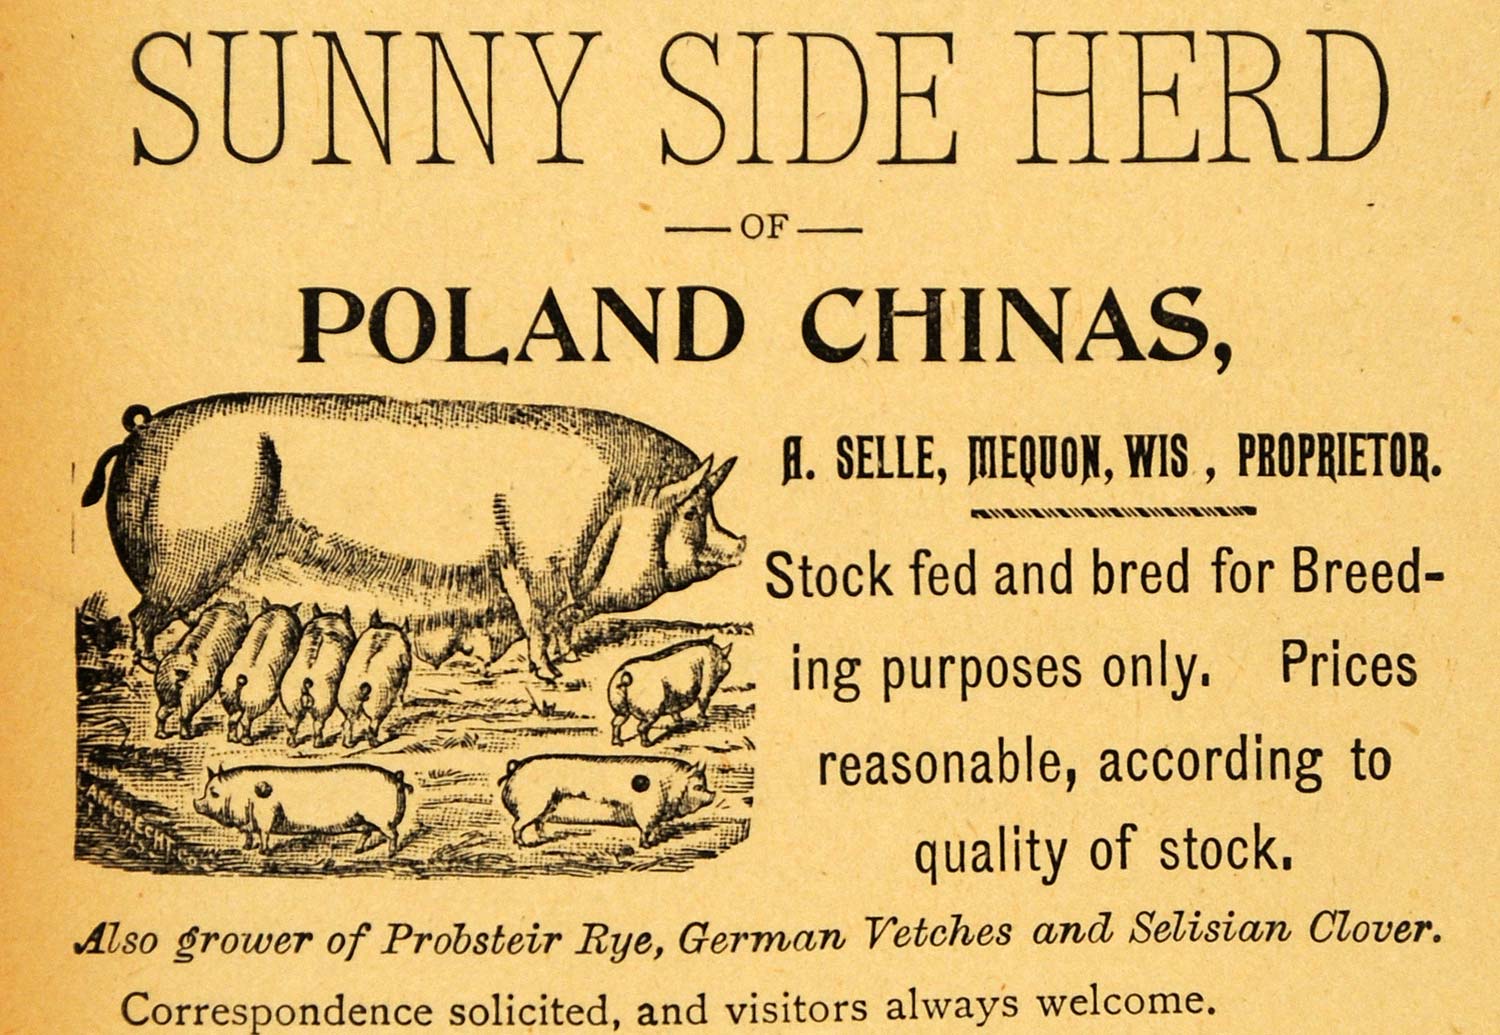 1893 Ad Poland China Hogs Pigs A. Selle Mequon Wis. - ORIGINAL ADVERTISING WFI1